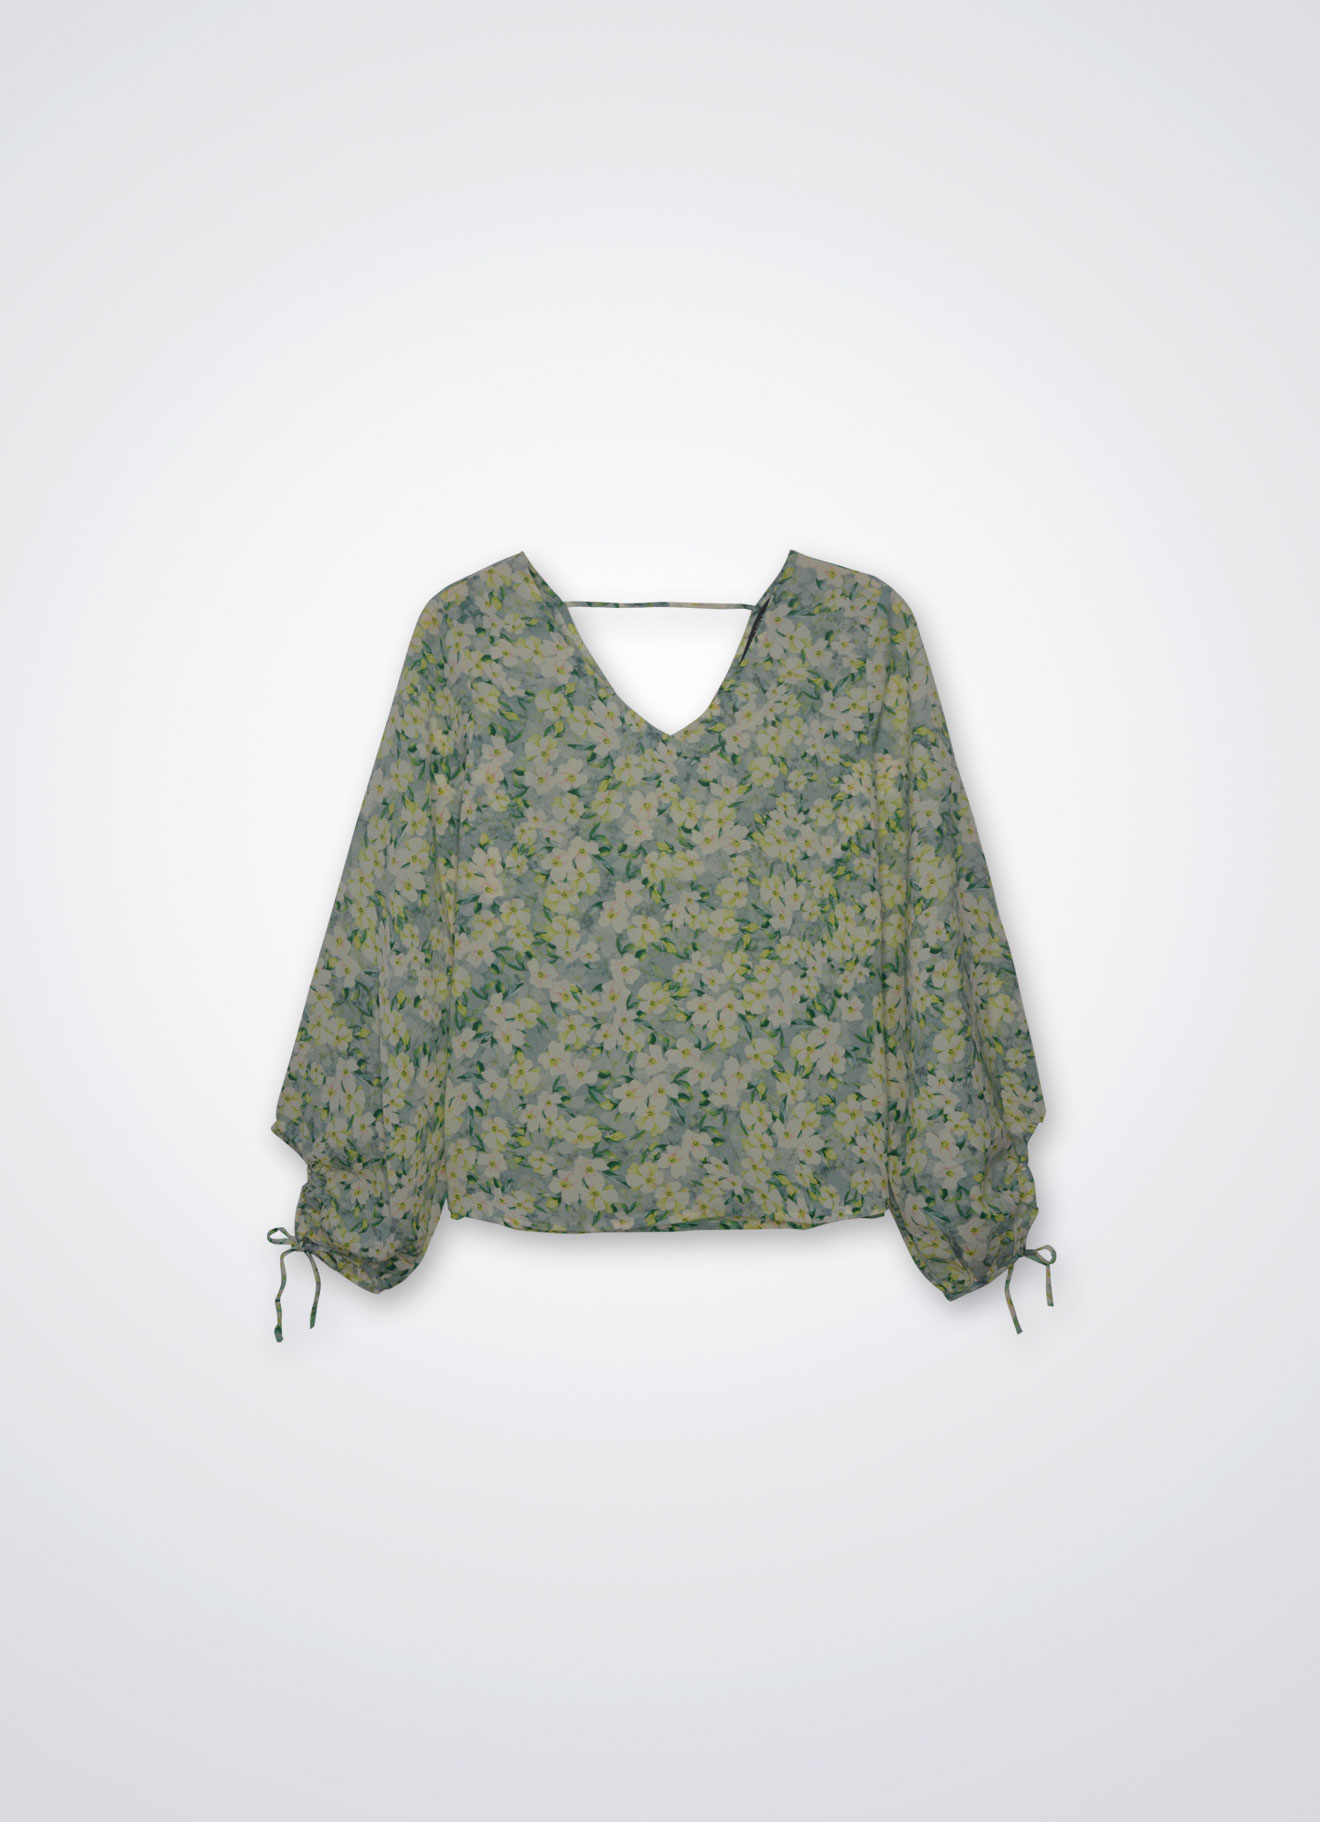 Blue-Haze by Floral Printed Top